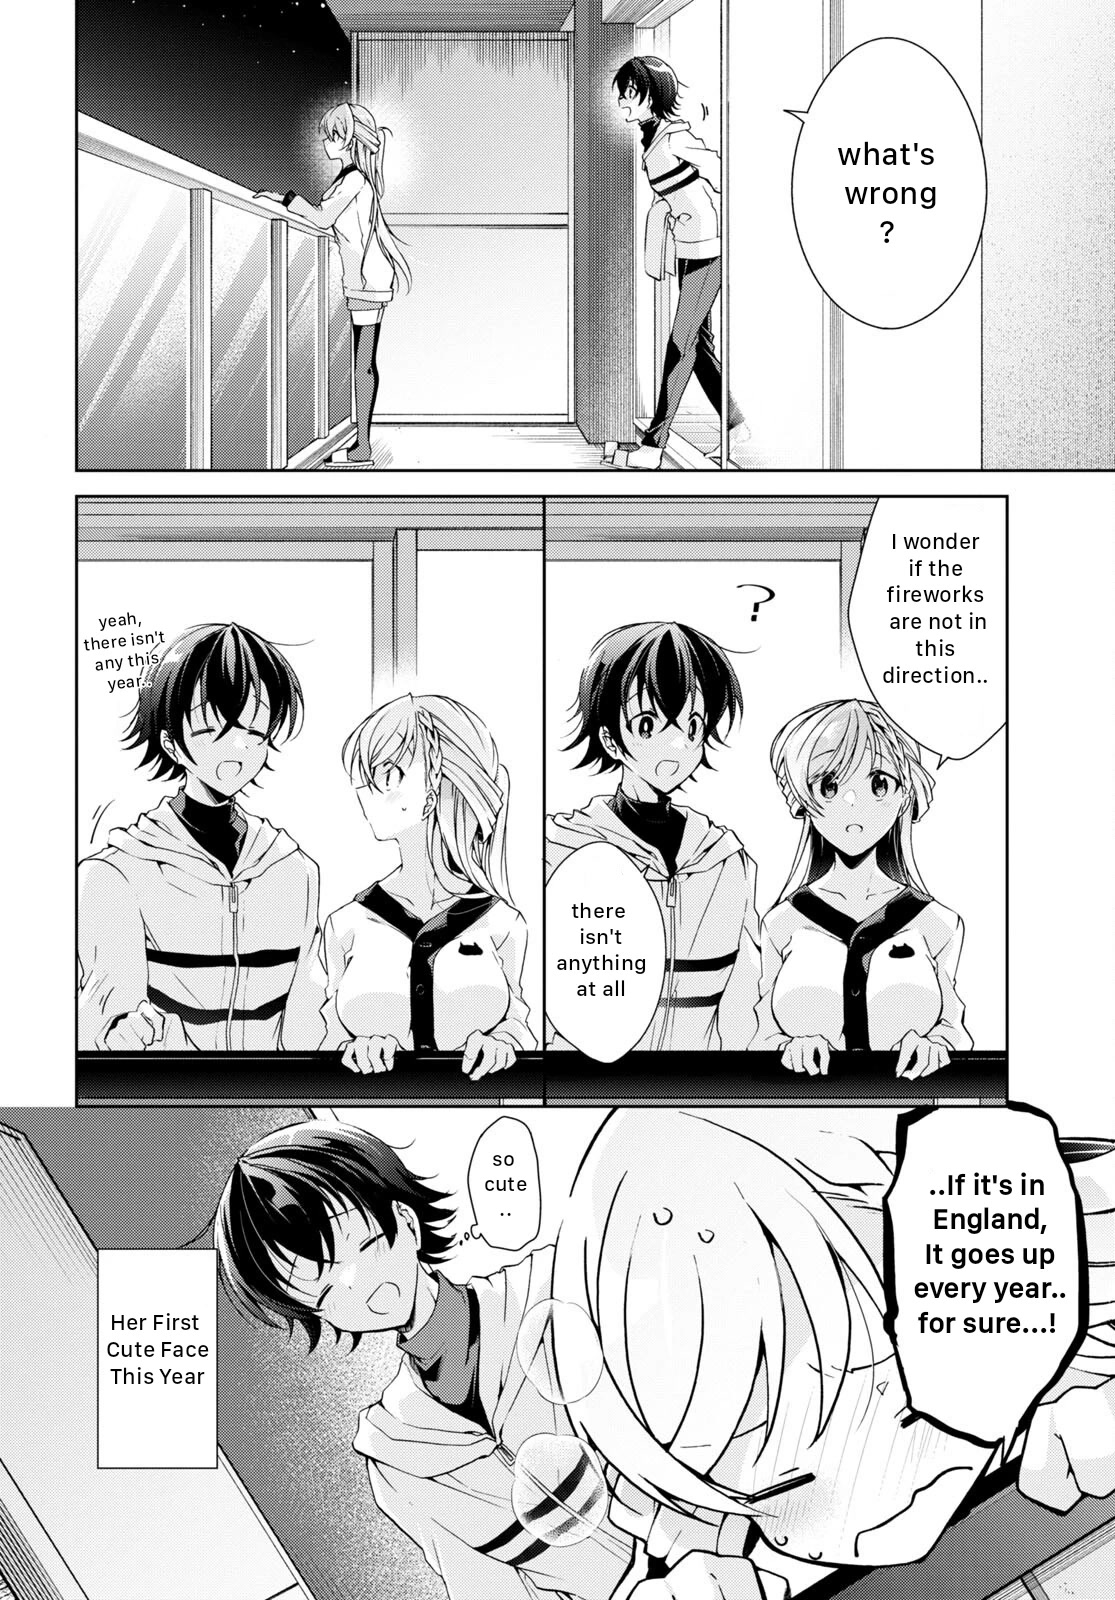 Isshiki-san Wants to Know About Love. - chapter 23 - #2